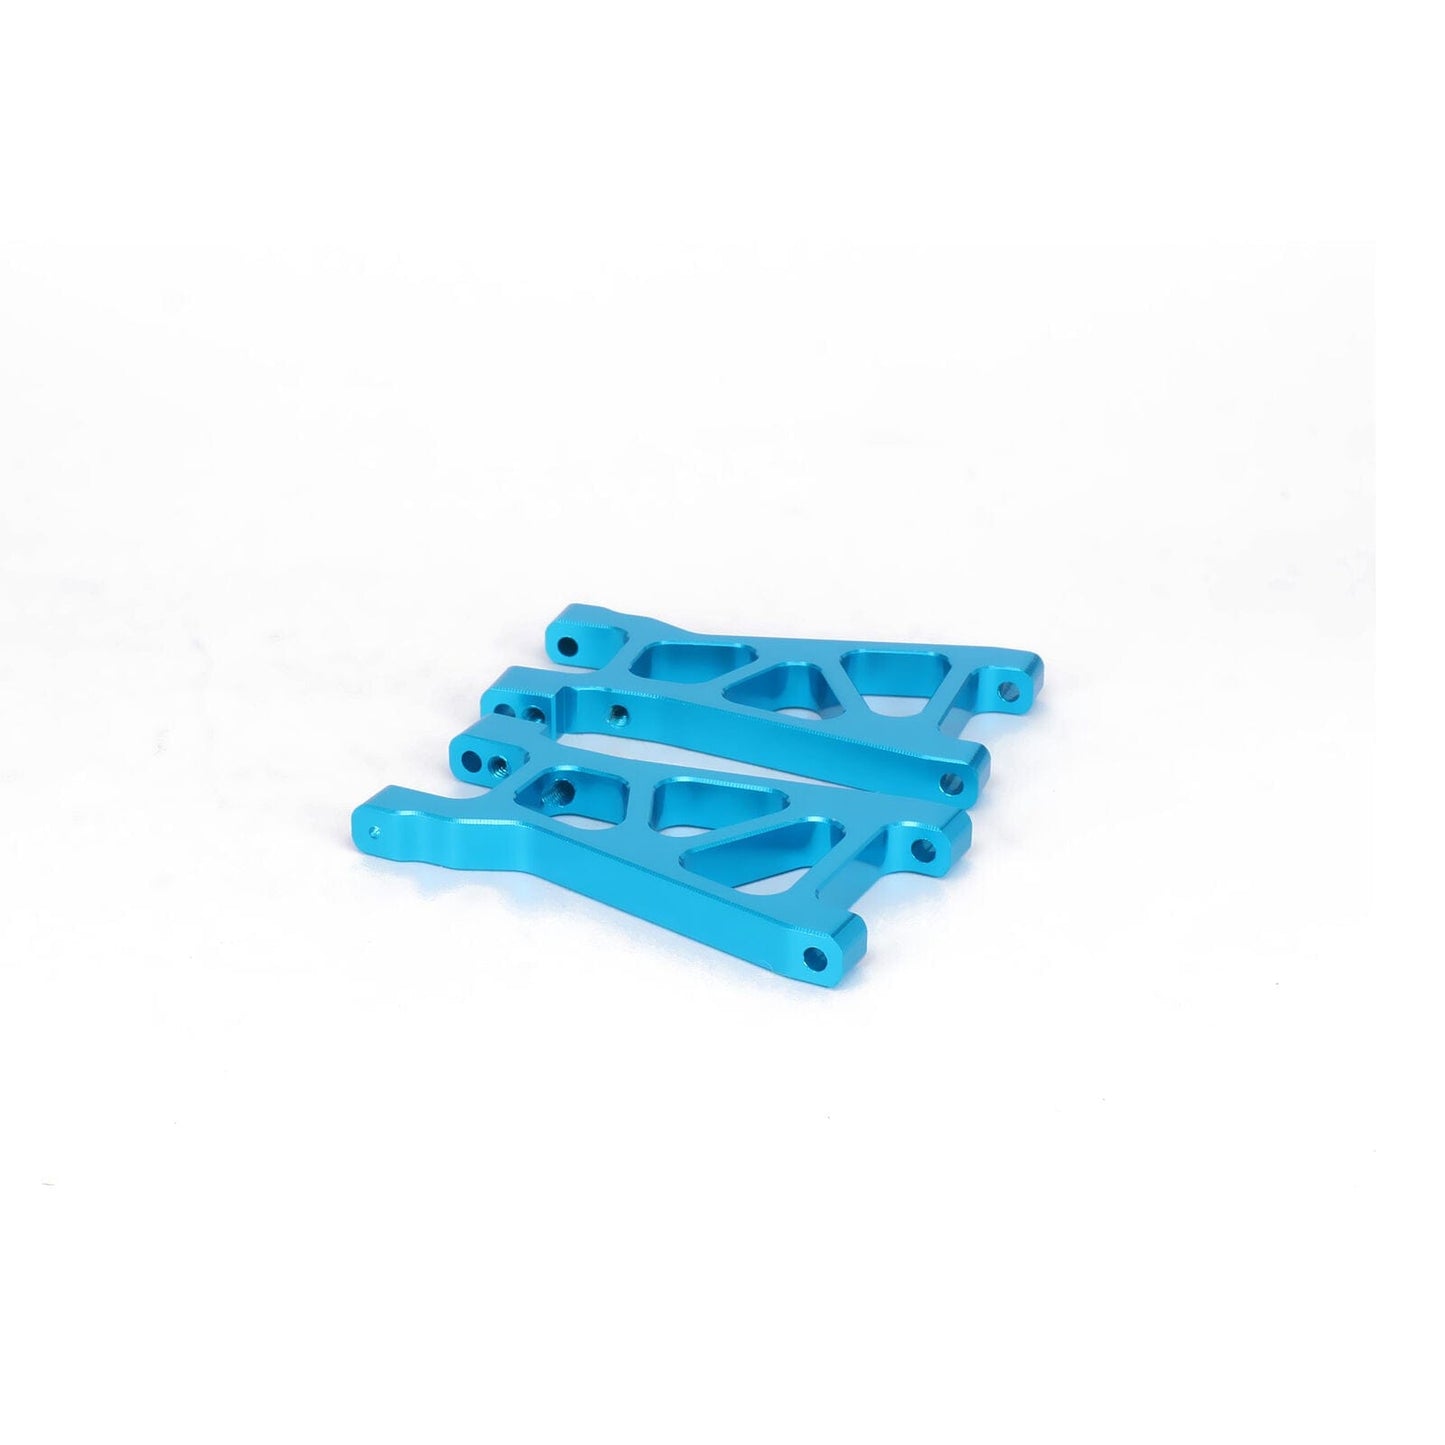 RCAWD HIMOTO UPGRADE PARTS Blue RCAWD Alloy Rear Lower Suspension Arm M606 23606 For RC Car 1/18 Himoto E18 2pcs